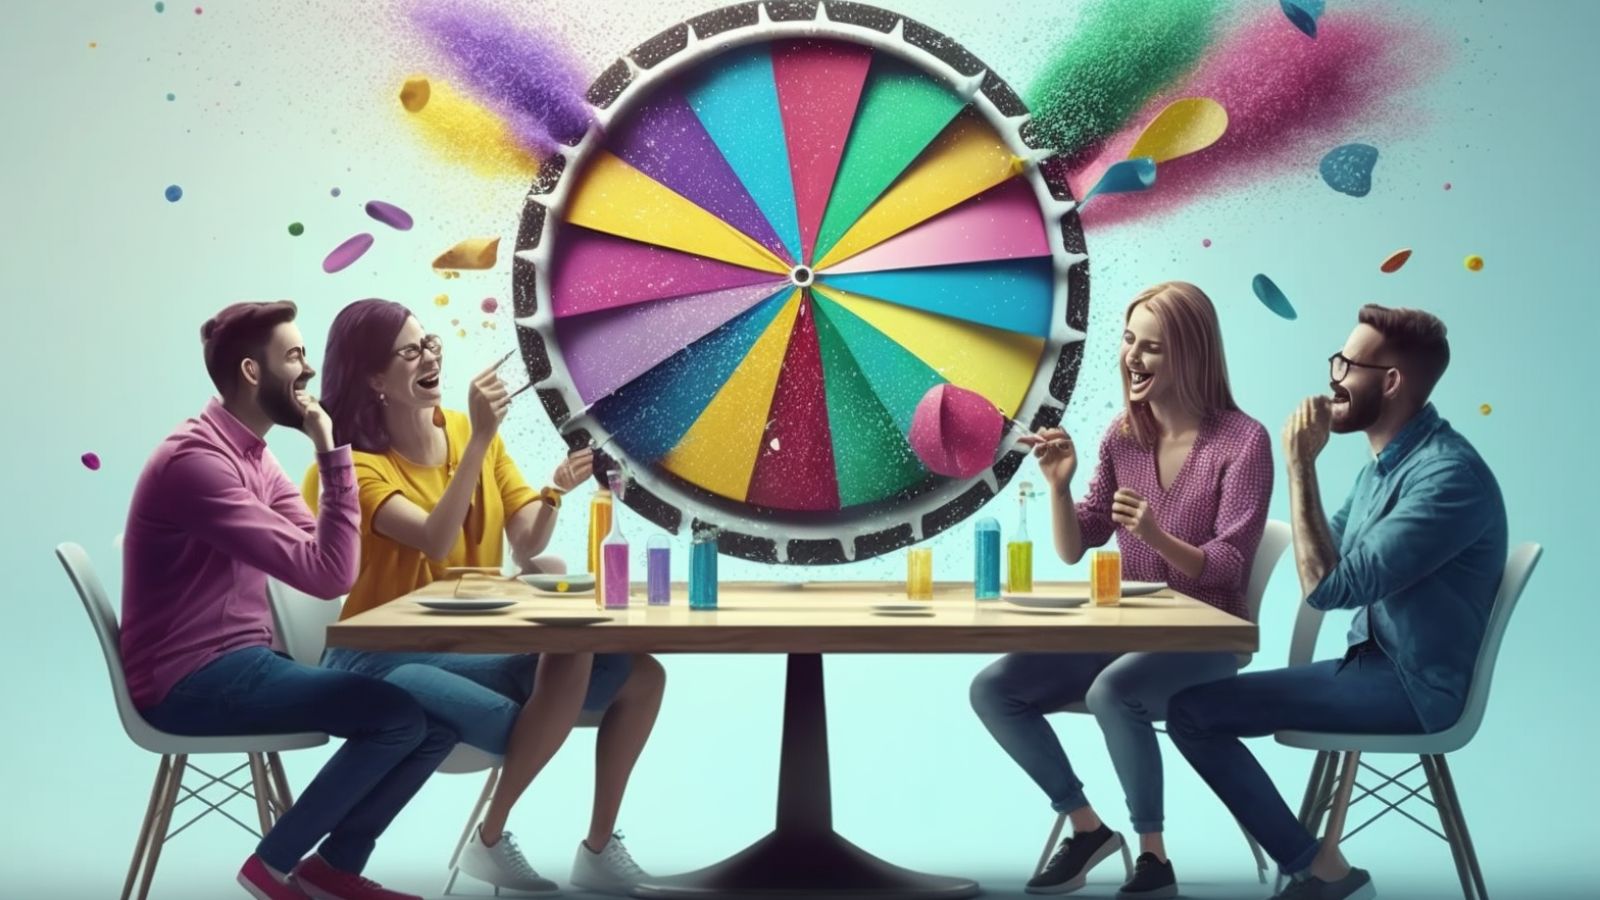 How Would You Like To Decide What You Want to Eat Today With Spin The Wheel?